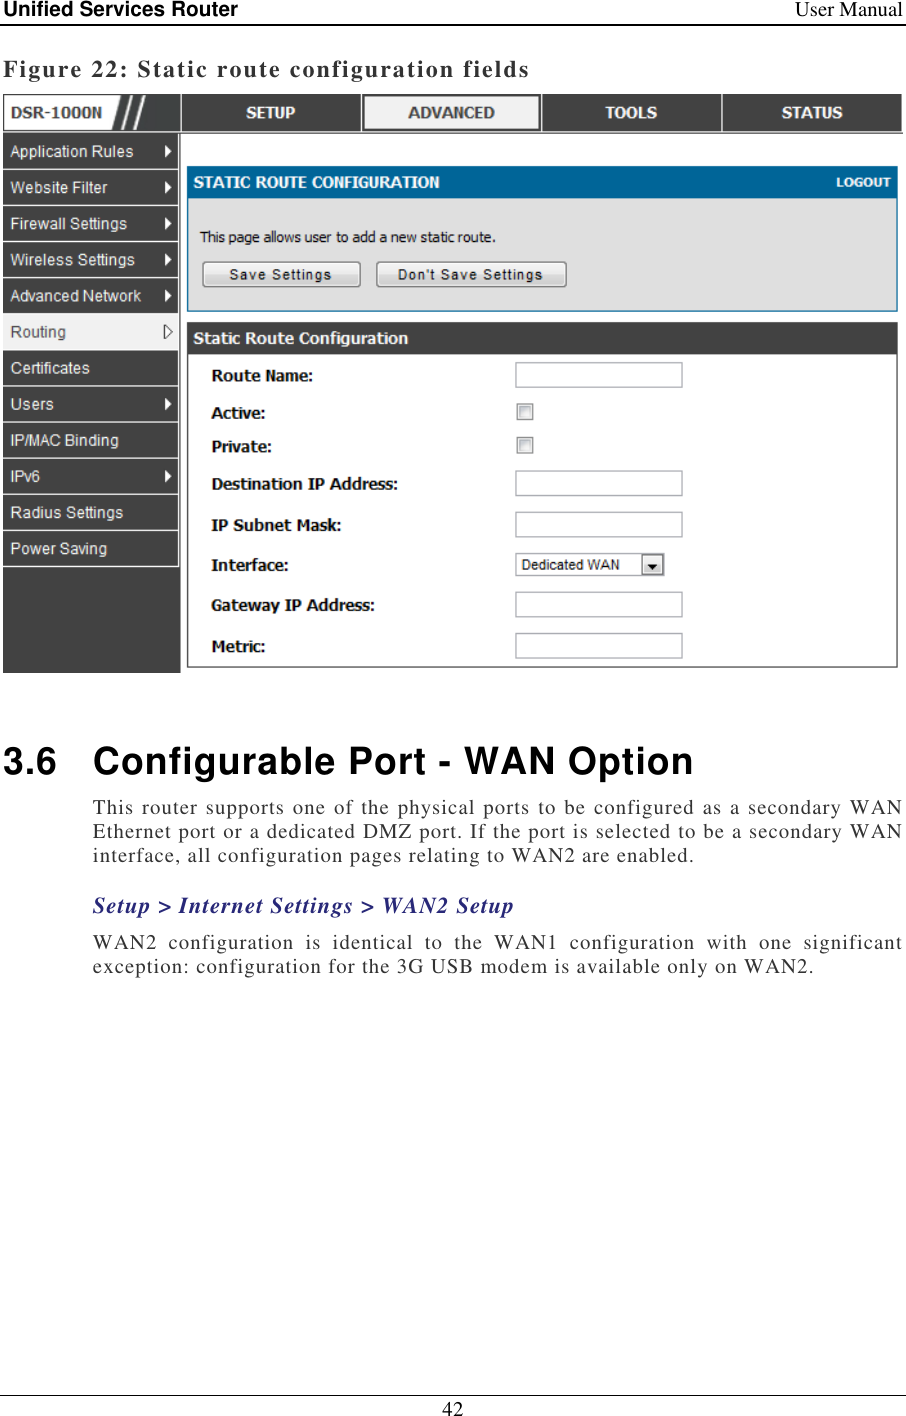 Unified Services Router    User Manual 42  Figure 22: Static route configuration fields   3.6  Configurable Port - WAN Option This router supports one  of the physical ports to be configured as a secondary WAN Ethernet port or a dedicated DMZ port. If the port is selected to be a secondary WAN interface, all configuration pages relating to WAN2 are enabled.  Setup &gt; Internet Settings &gt; WAN2 Setup WAN2  configuration  is  identical  to  the  WAN1  configuration  with  one  significant exception: configuration for the 3G USB modem is available only on WAN2.  